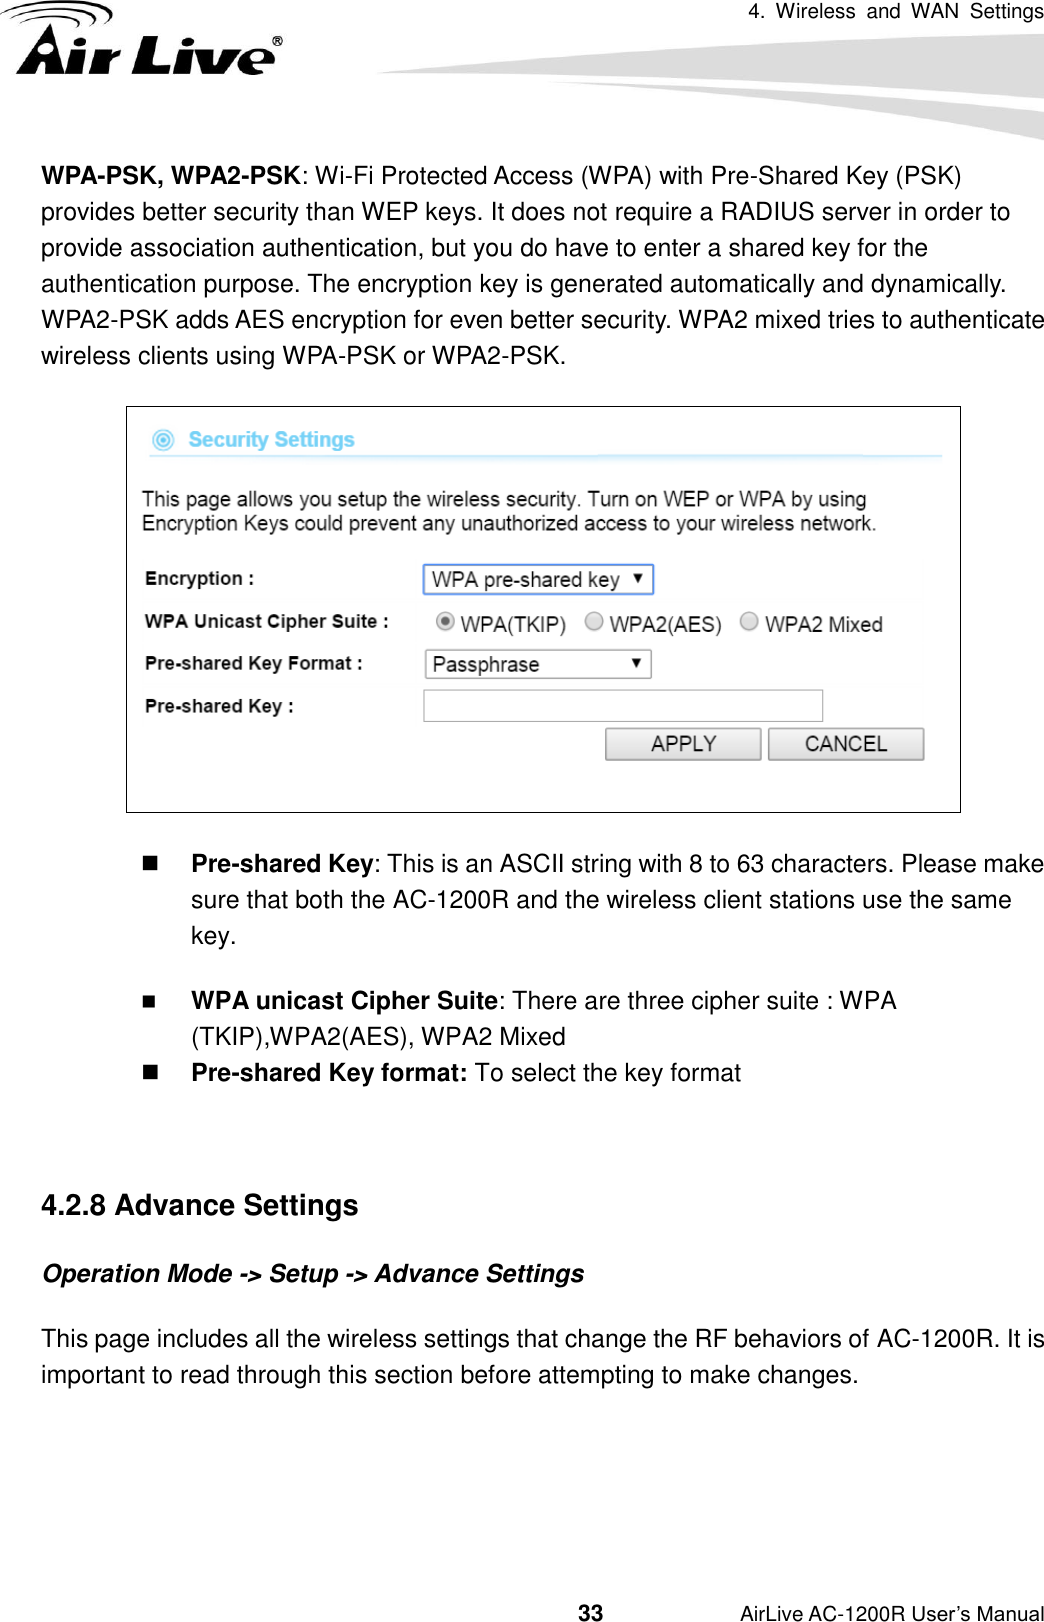 4.  Wireless  and  WAN  Settings                                         33           AirLive AC-1200R User’s Manual WPA-PSK, WPA2-PSK: Wi-Fi Protected Access (WPA) with Pre-Shared Key (PSK) provides better security than WEP keys. It does not require a RADIUS server in order to provide association authentication, but you do have to enter a shared key for the authentication purpose. The encryption key is generated automatically and dynamically. WPA2-PSK adds AES encryption for even better security. WPA2 mixed tries to authenticate wireless clients using WPA-PSK or WPA2-PSK.   Pre-shared Key: This is an ASCII string with 8 to 63 characters. Please make sure that both the AC-1200R and the wireless client stations use the same key.    WPA unicast Cipher Suite: There are three cipher suite : WPA (TKIP),WPA2(AES), WPA2 Mixed  Pre-shared Key format: To select the key format  4.2.8 Advance Settings Operation Mode -&gt; Setup -&gt; Advance Settings This page includes all the wireless settings that change the RF behaviors of AC-1200R. It is important to read through this section before attempting to make changes.   